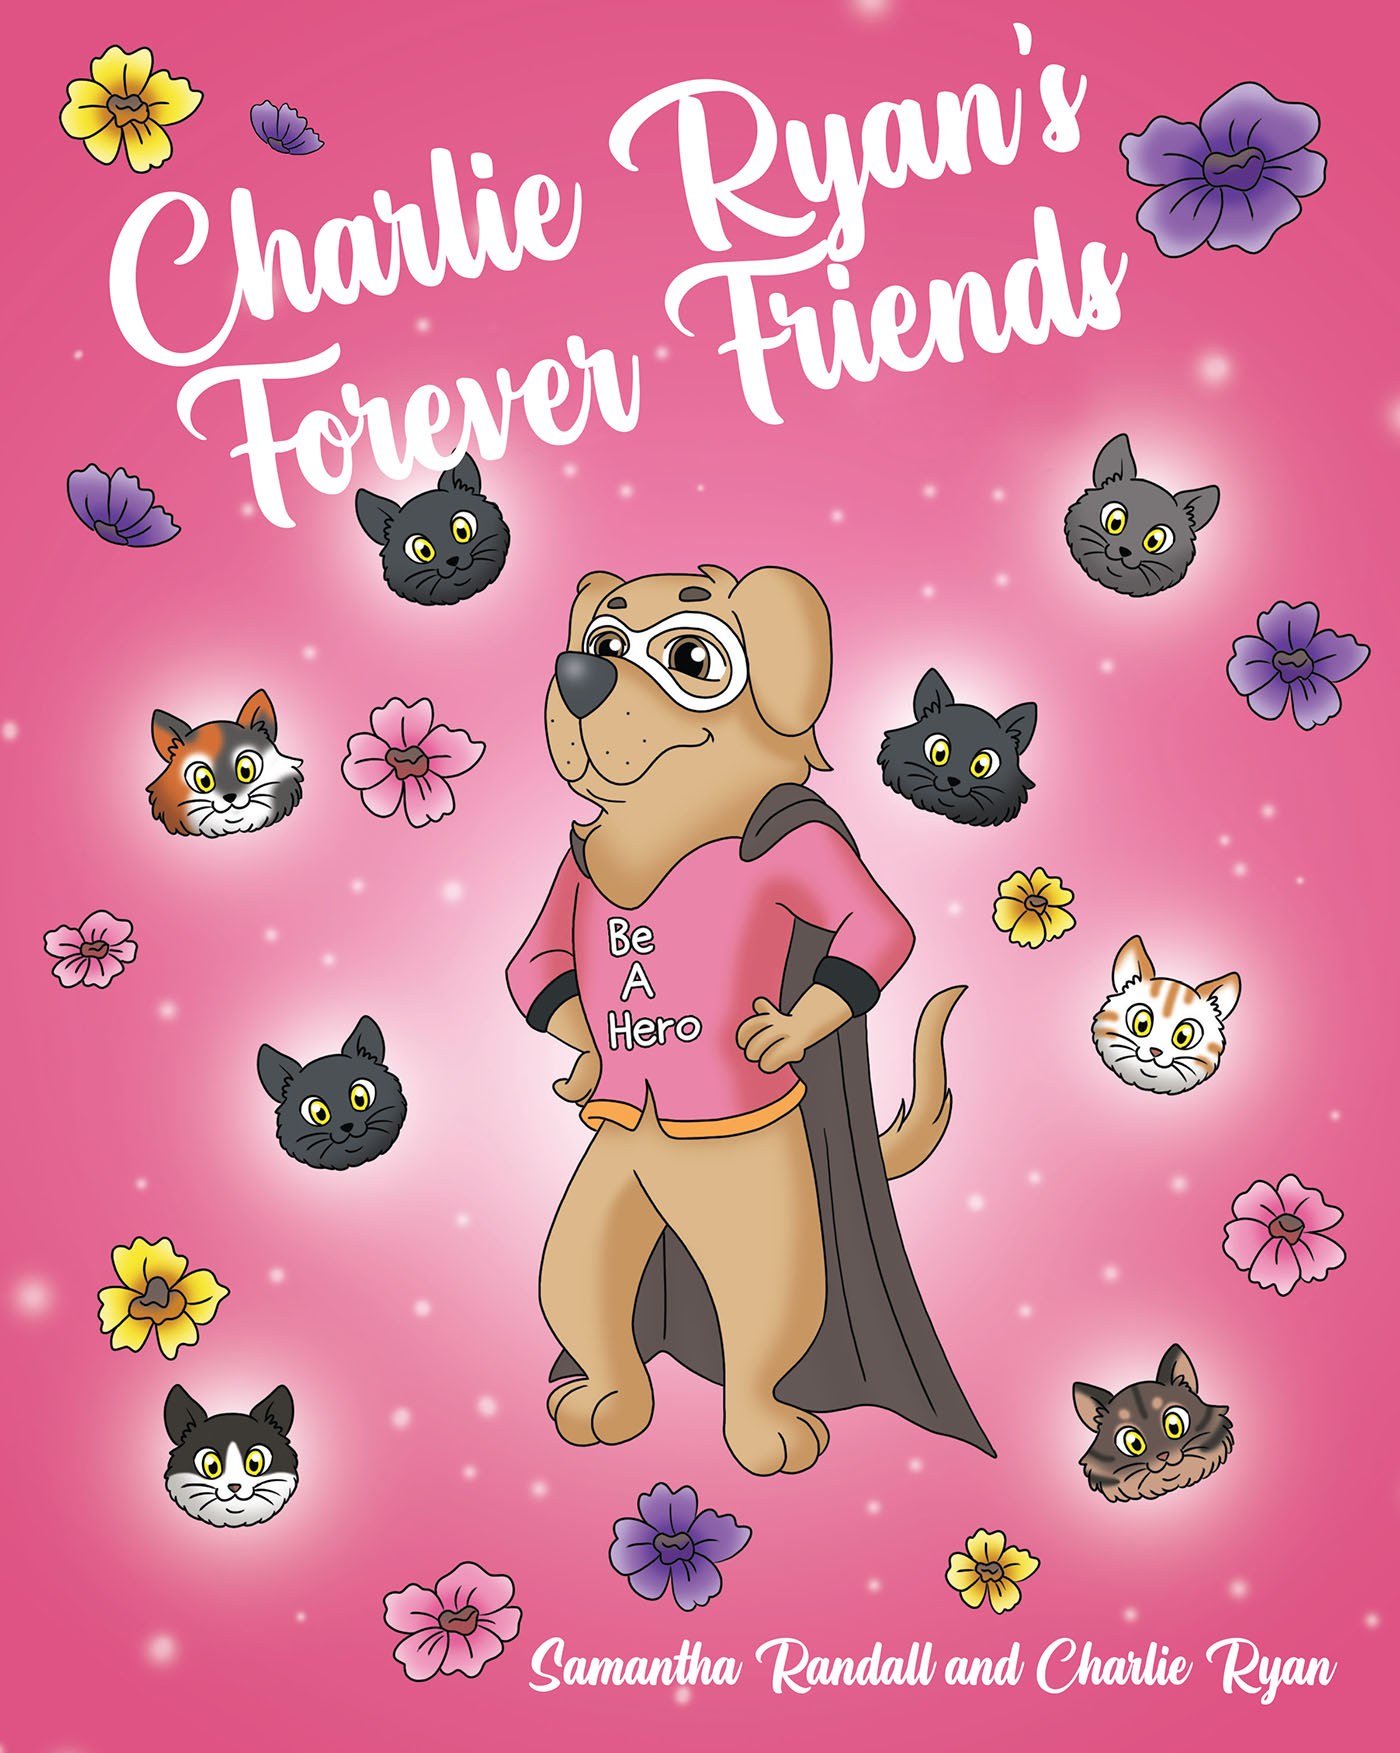 Samantha Randall and Charlie Ryan’s Newly Released "Charlie Ryan’s Forever Friends" Shares a Sweet Message About Rescuing Shelter Animals